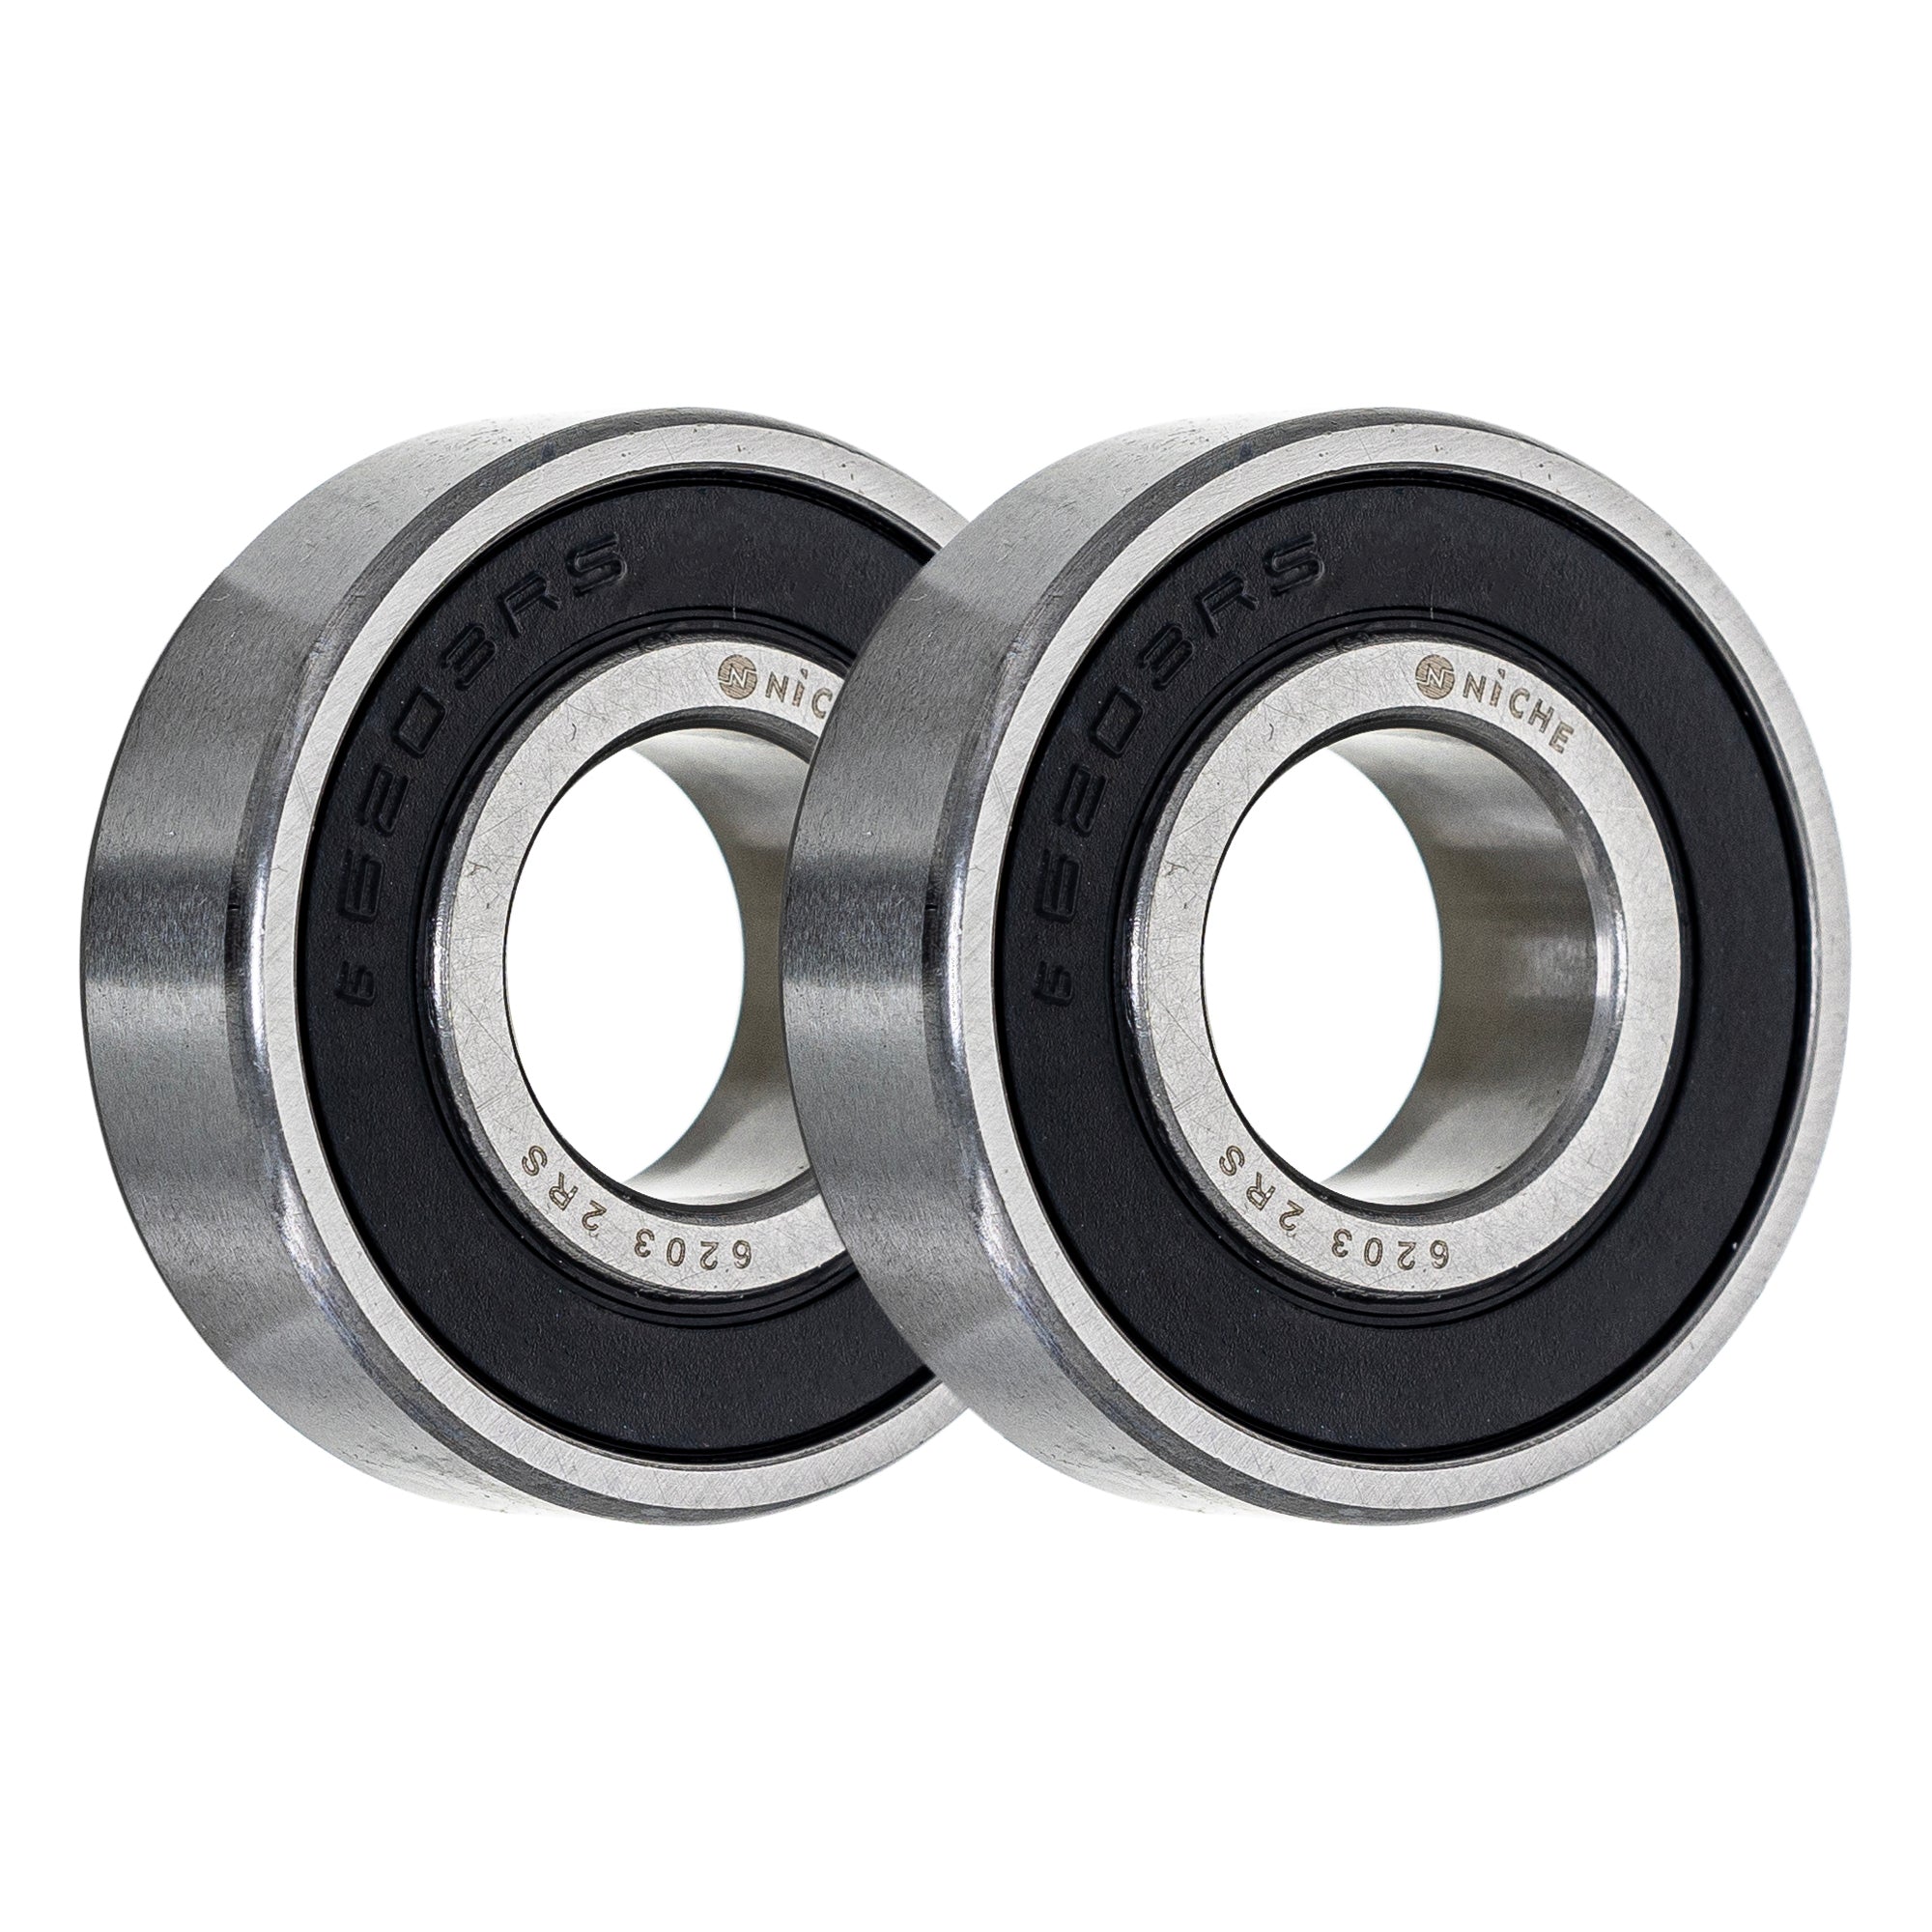 NICHE MK1009079 Wheel Bearing Kit for zOTHER Ref No RM250